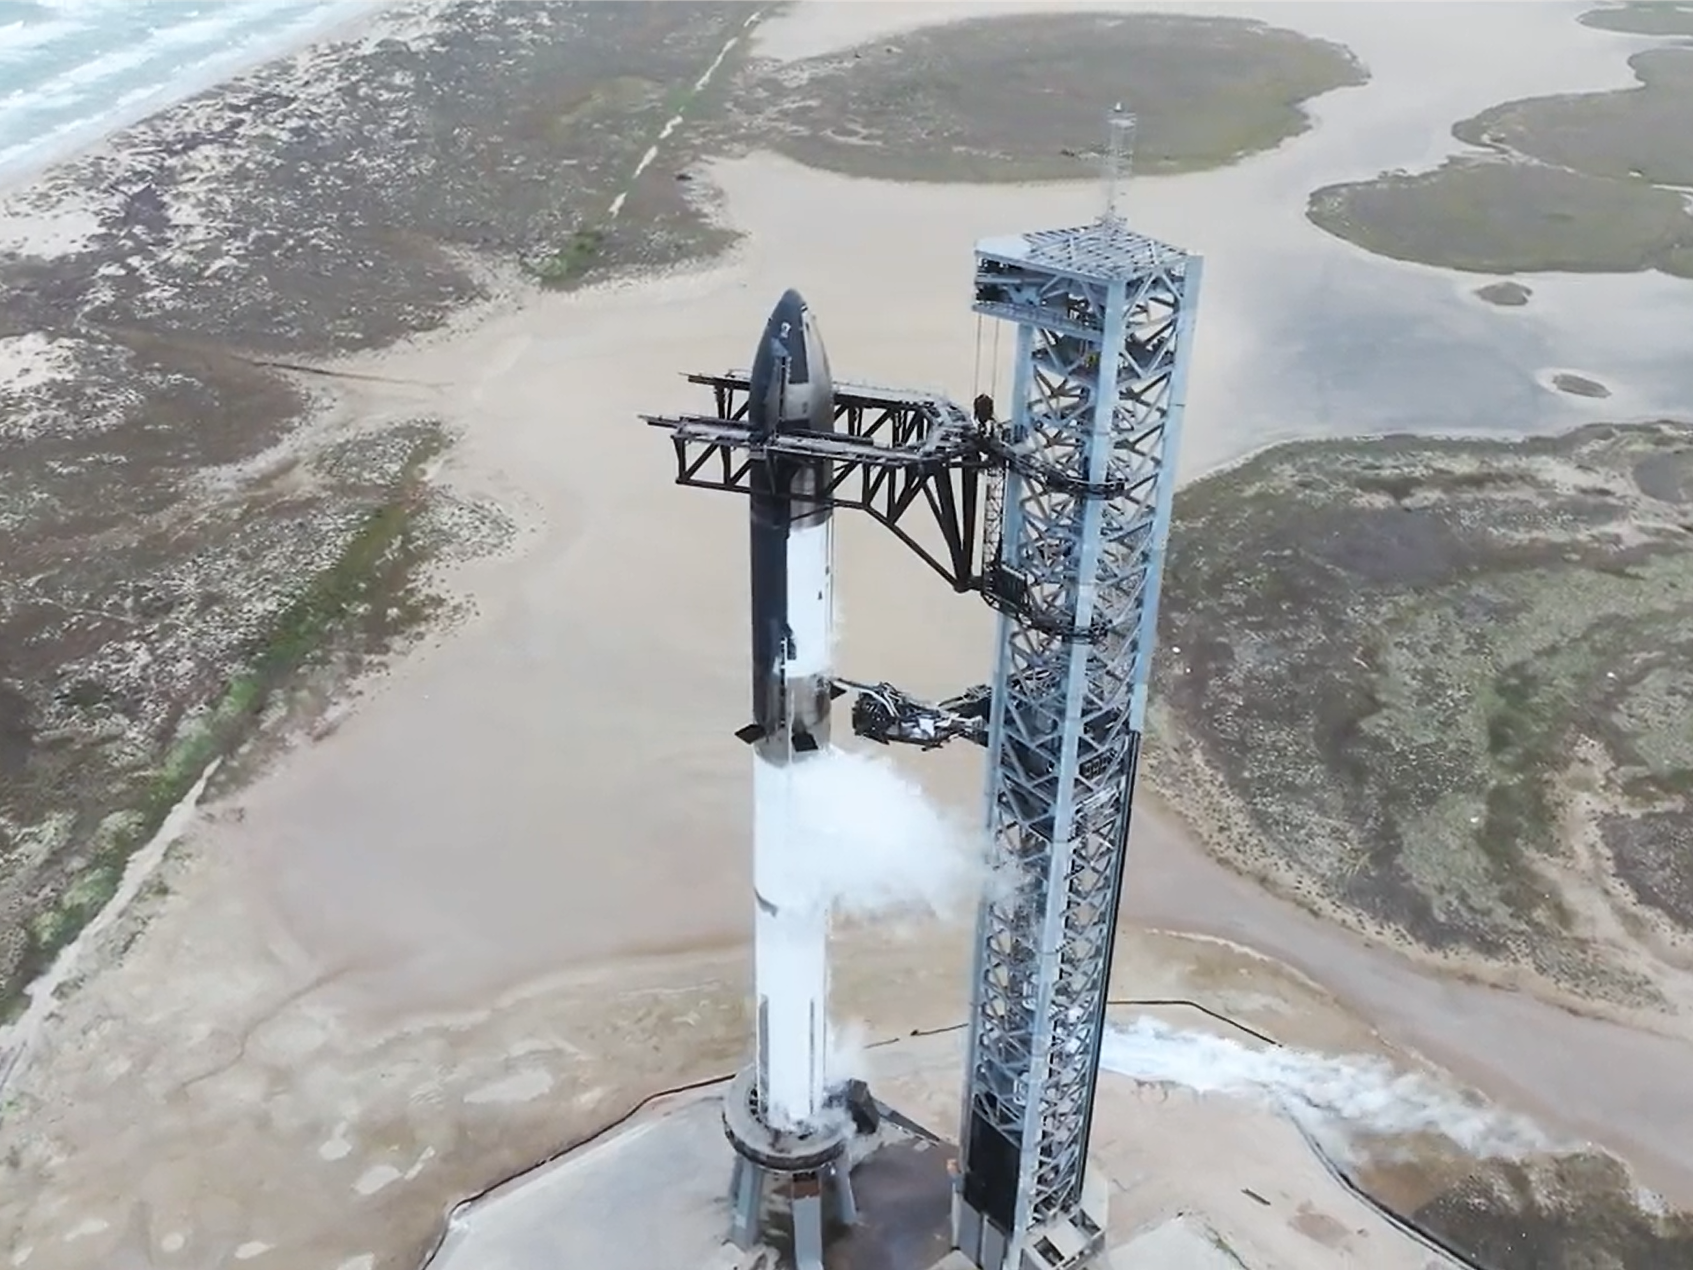 SpaceX performed a full flight-like wet dress rehearsal of a fully-stacked Starship rocket at its Starbase facility in Texas on Monday, 23 January